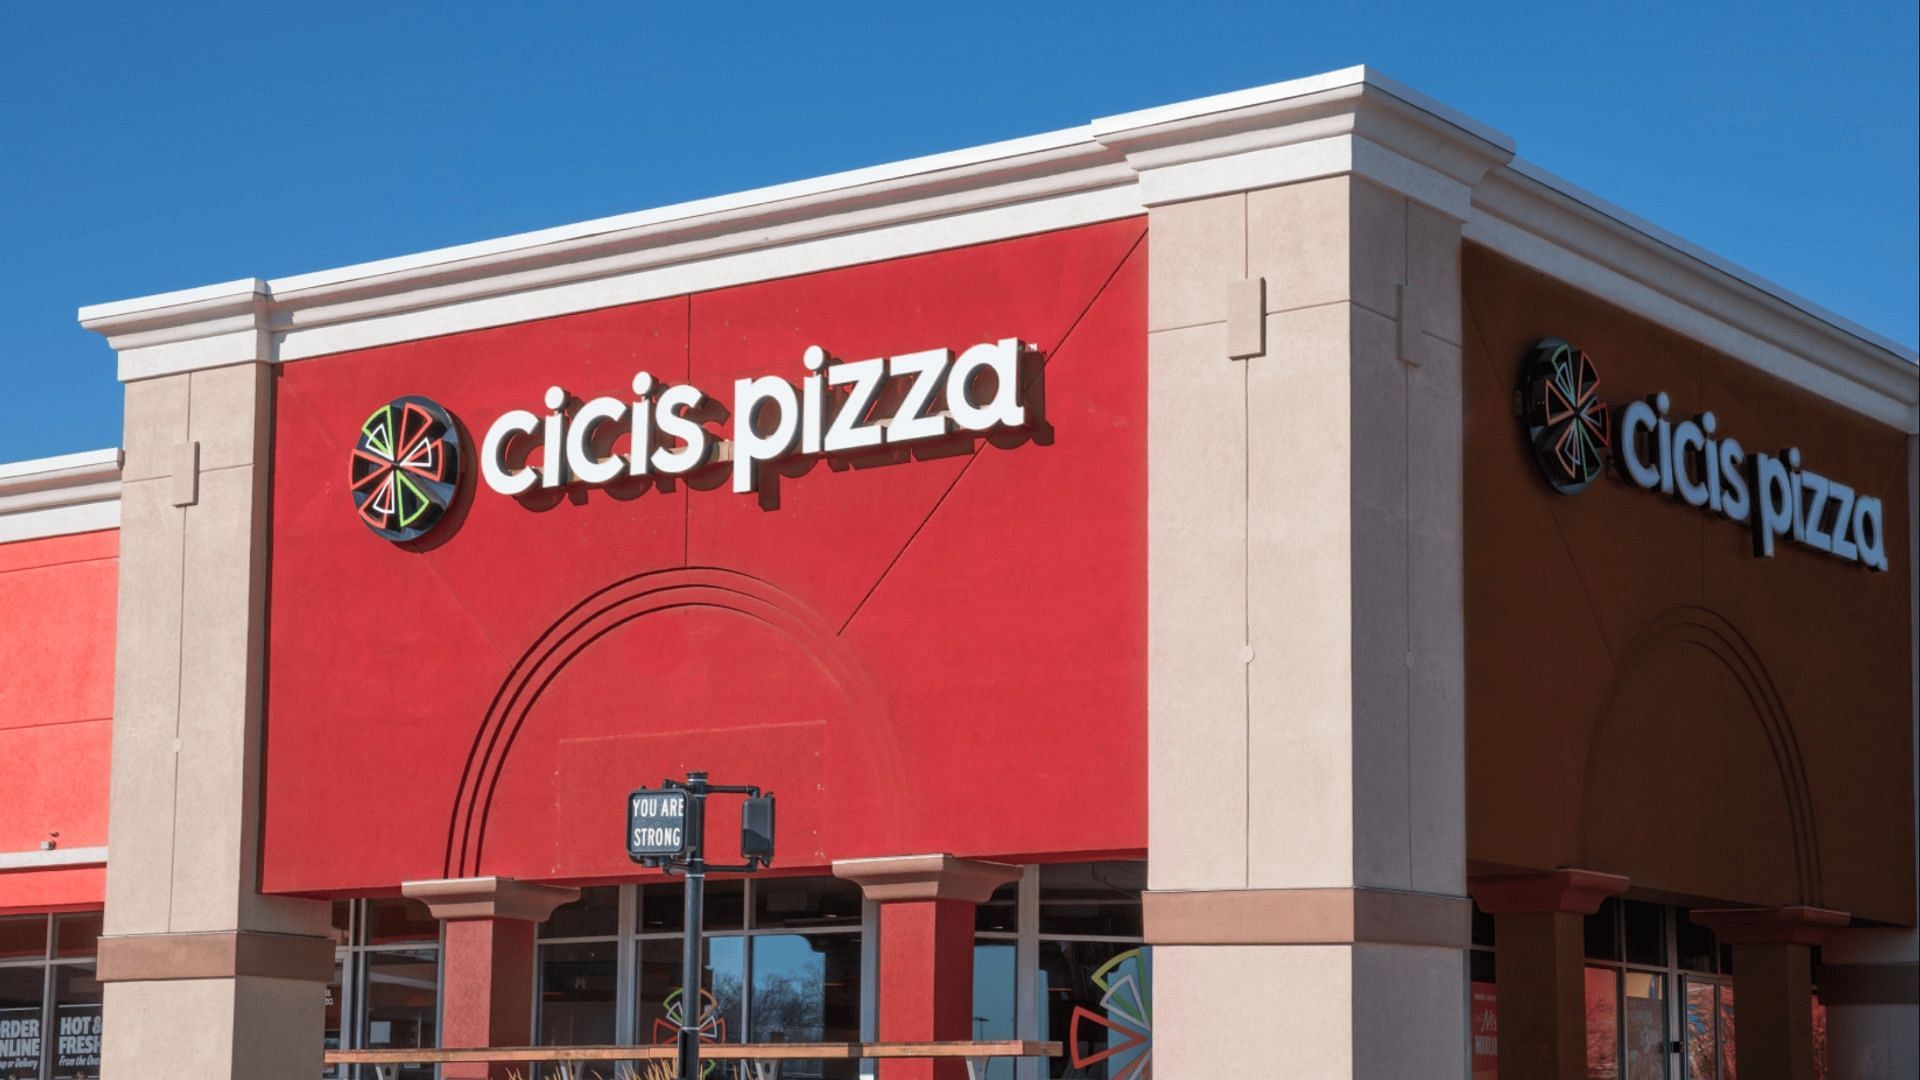 Cicis Pizza 4.99 Adult Buffet deal How to avail, availability, and